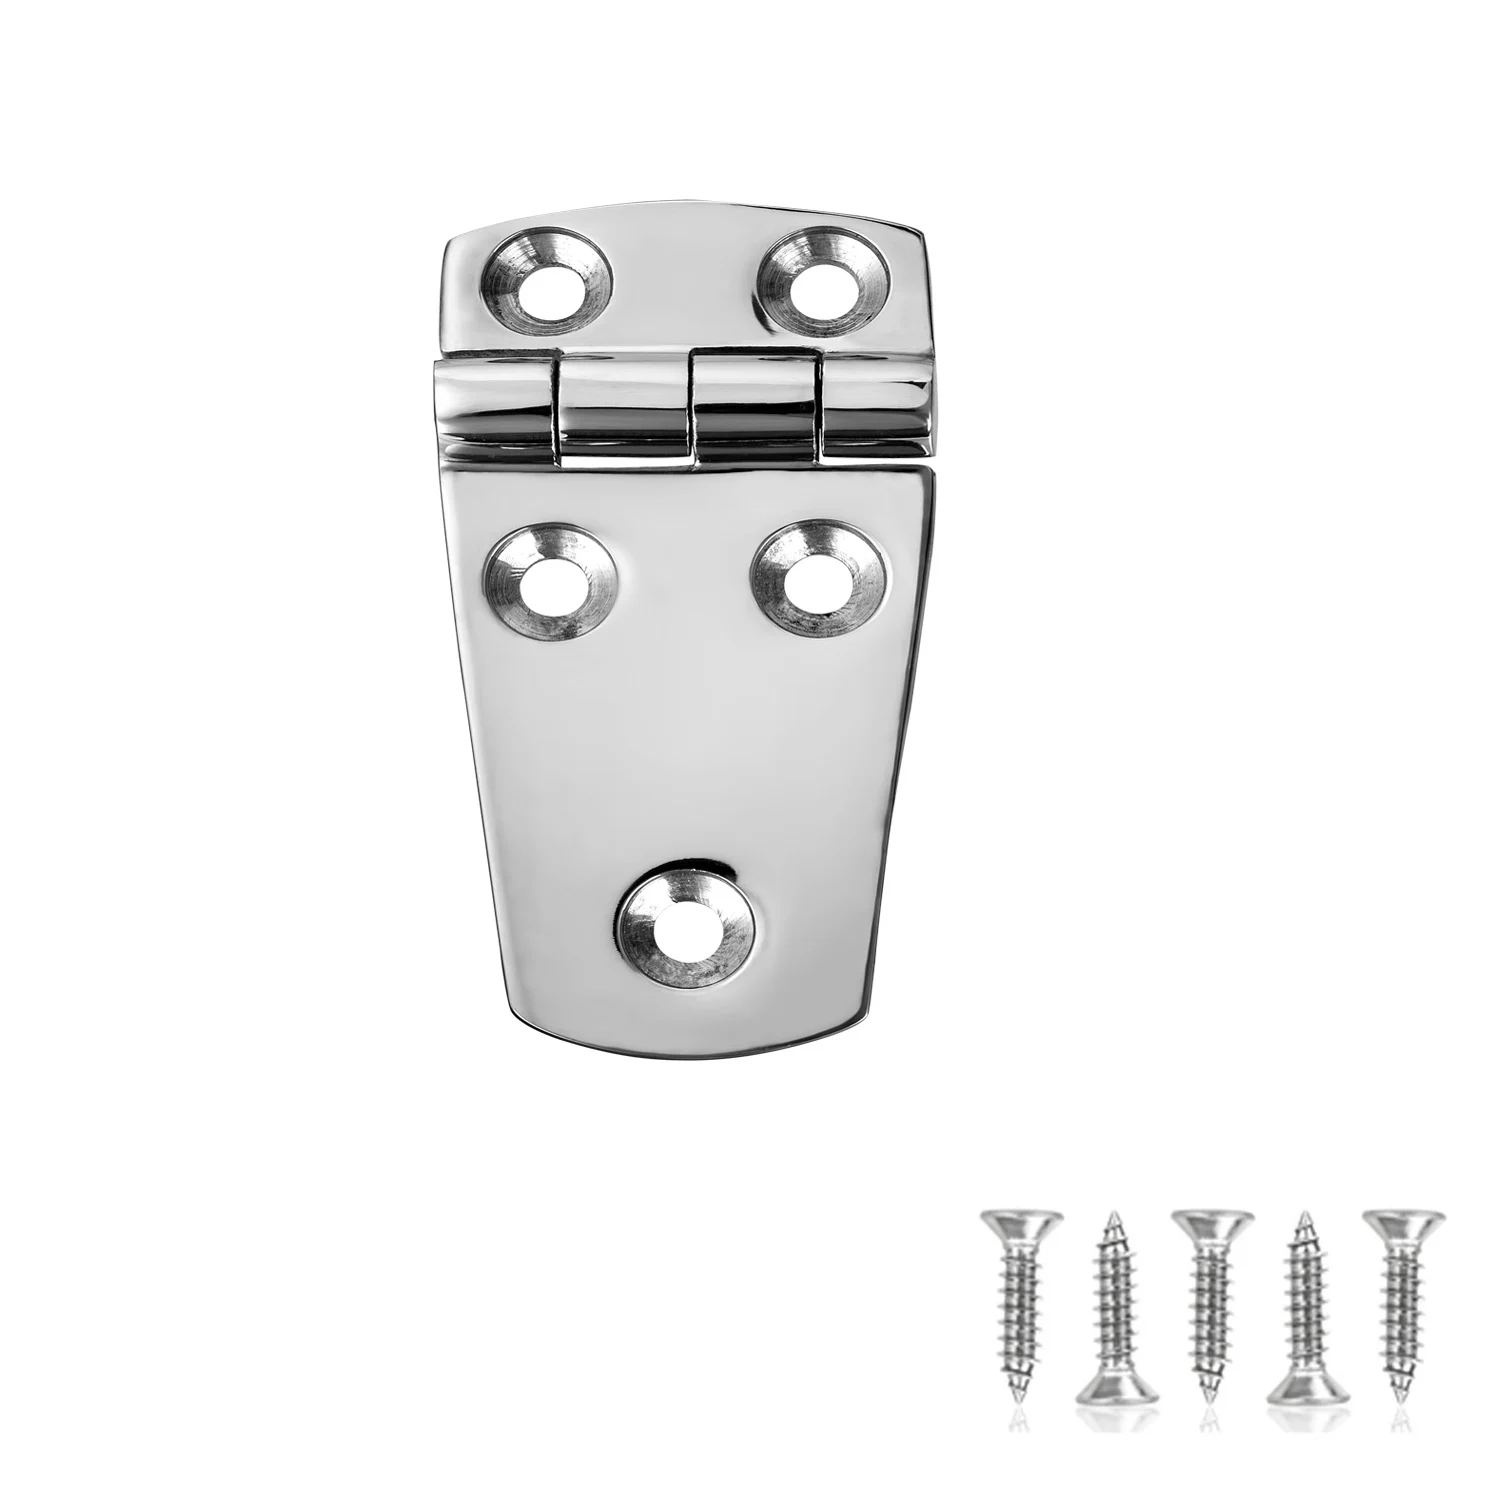 Marine Boat Hatch Hinges Stainless Steel, 3 Inch X 1.5 Inches(76 X 38MM) 5 Holes, No Noise, Heavy Duty 316 Ss with Screws 1 pair universal stainless steel toilet seat fittings toilet cover smart seat screws top expansion mounting bolts screw hinges